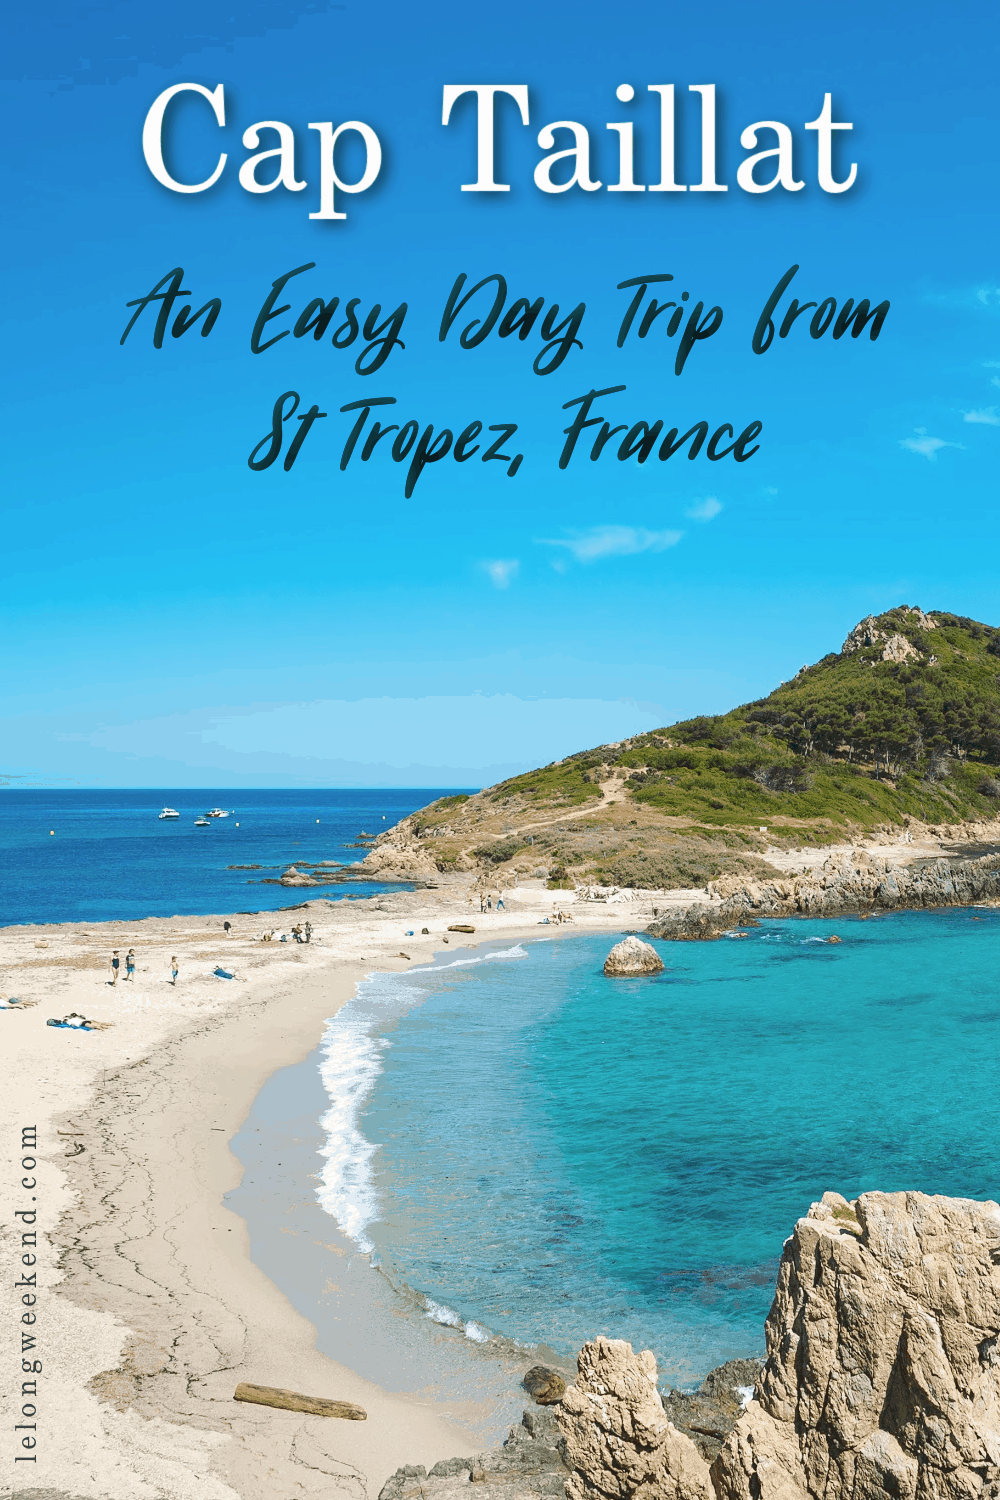 Discover Cap Taillat - An Easy Day Trip from St Tropez, France